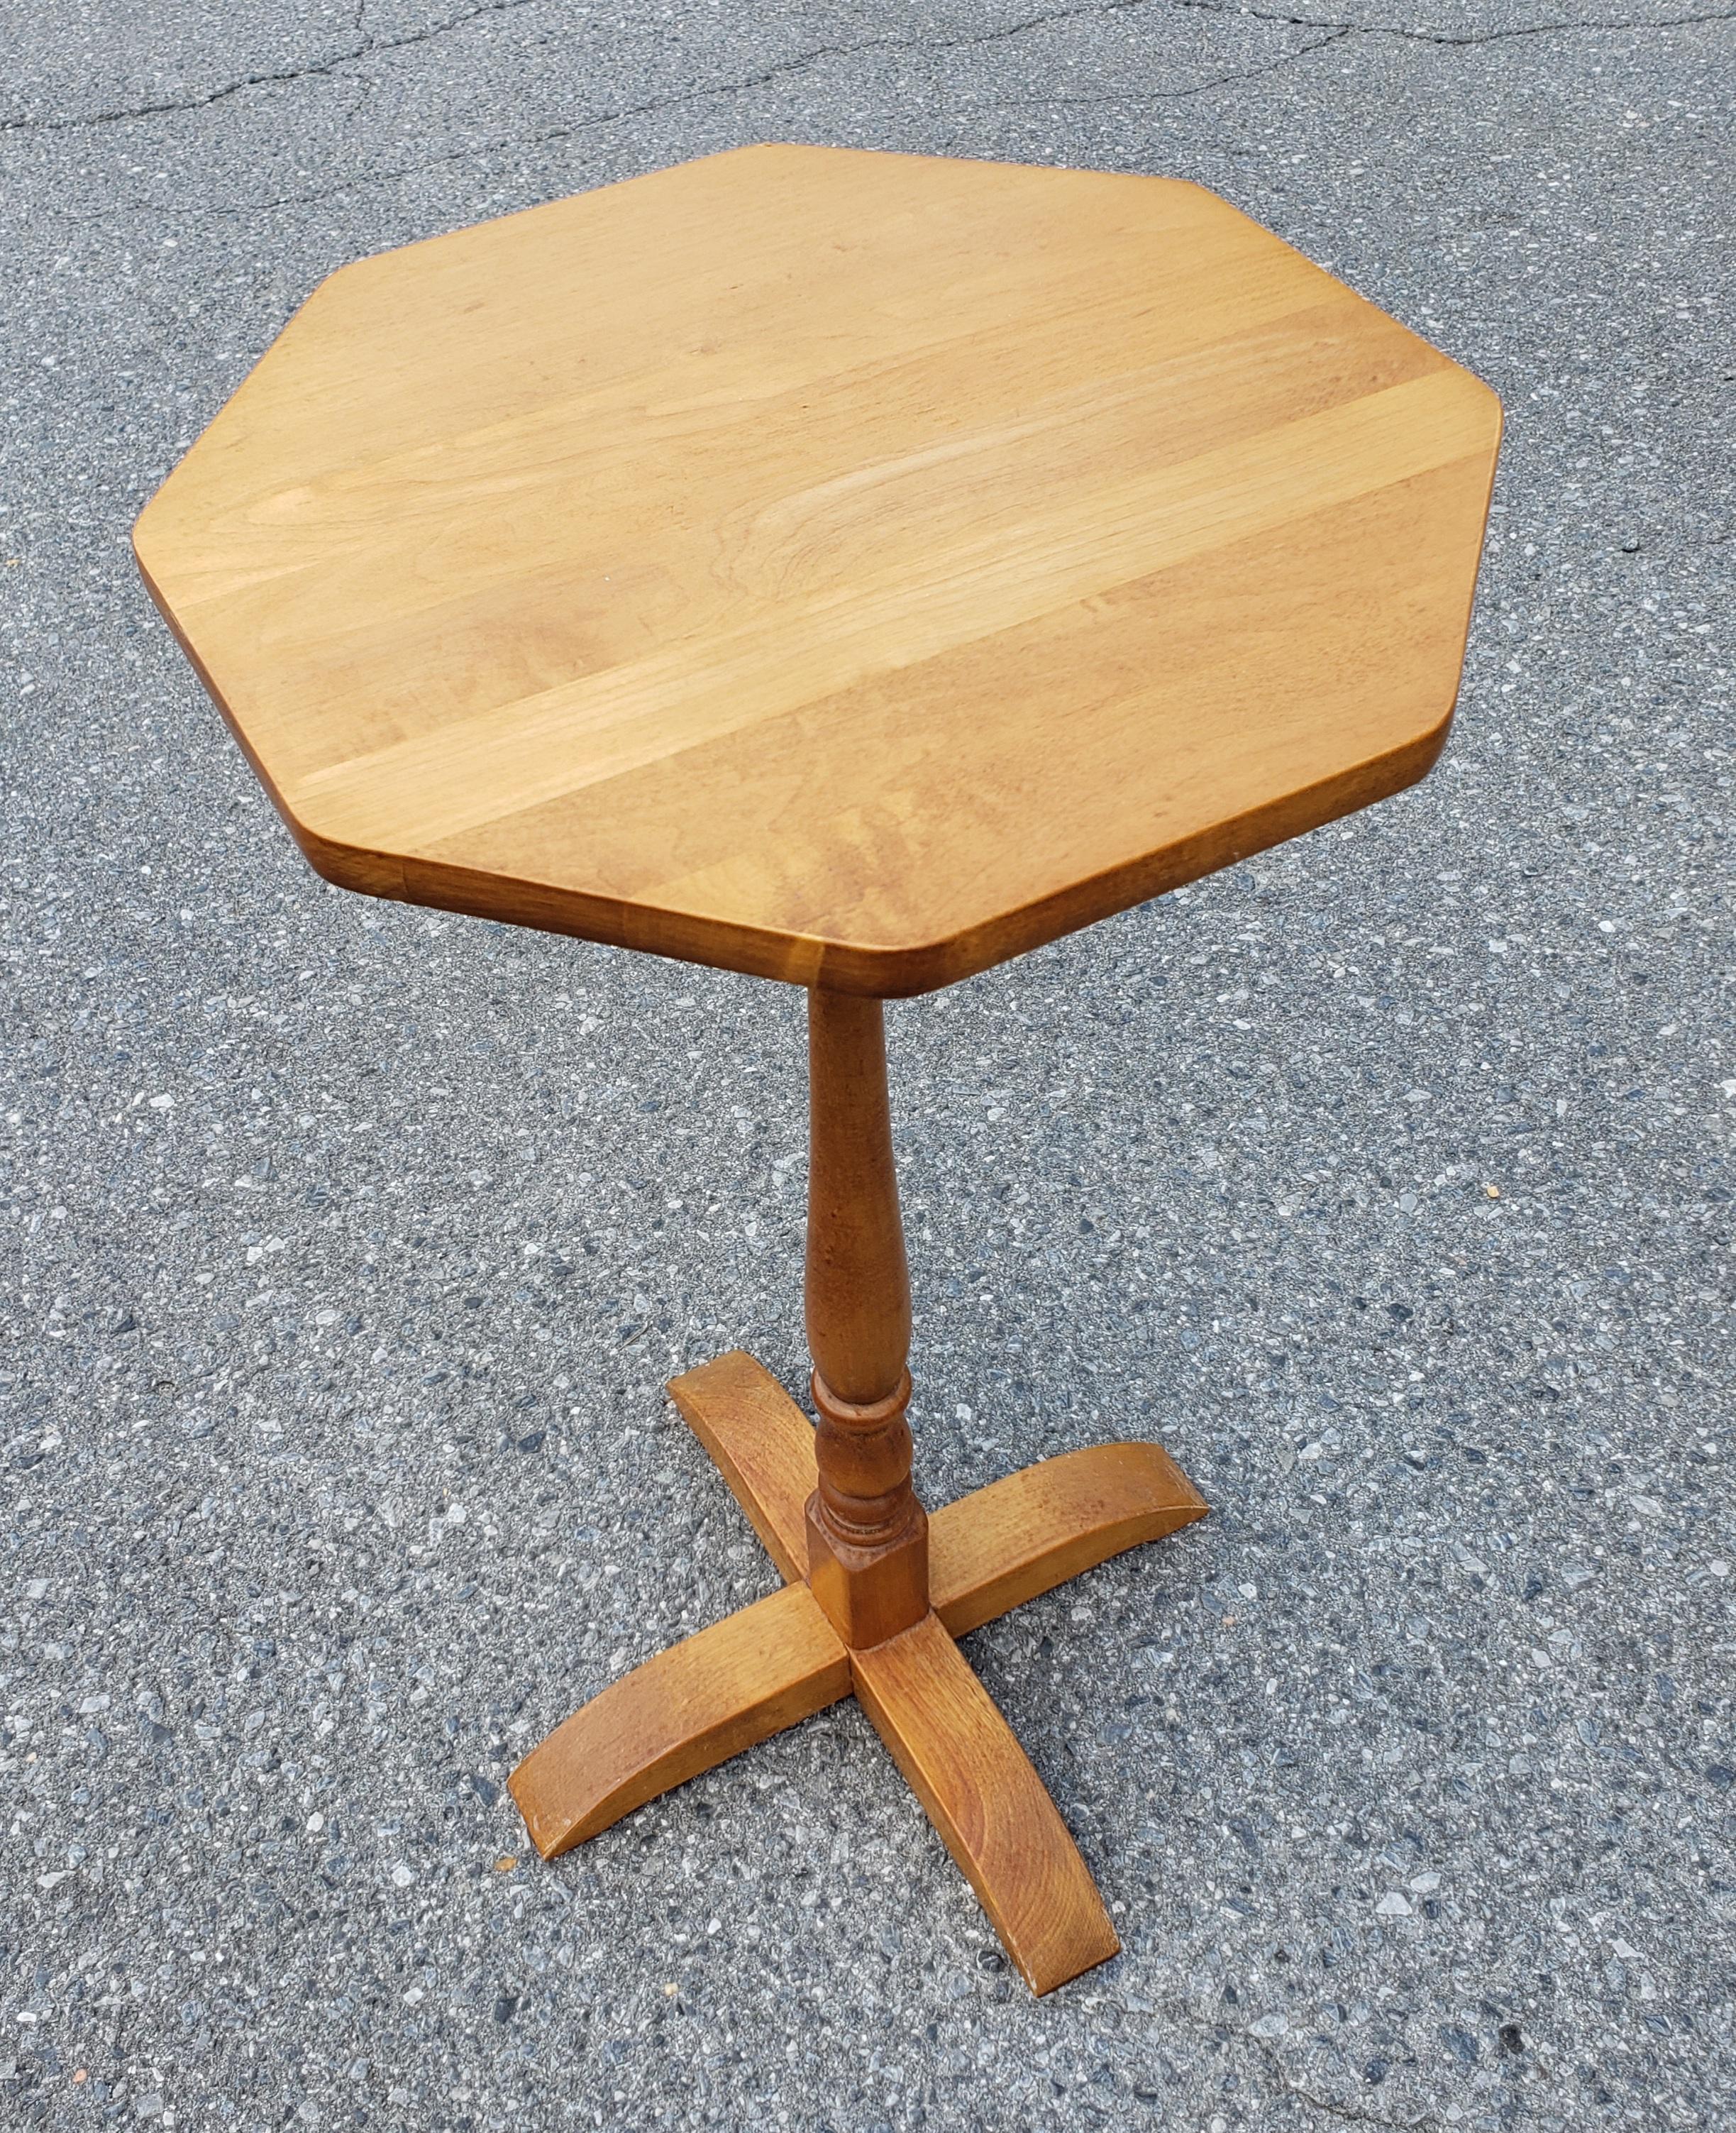 A Cohasset Colonials Octogonal Pedestal Quadpod Maple Lamp Table By Hagerty in great vintage condition. Measures 13